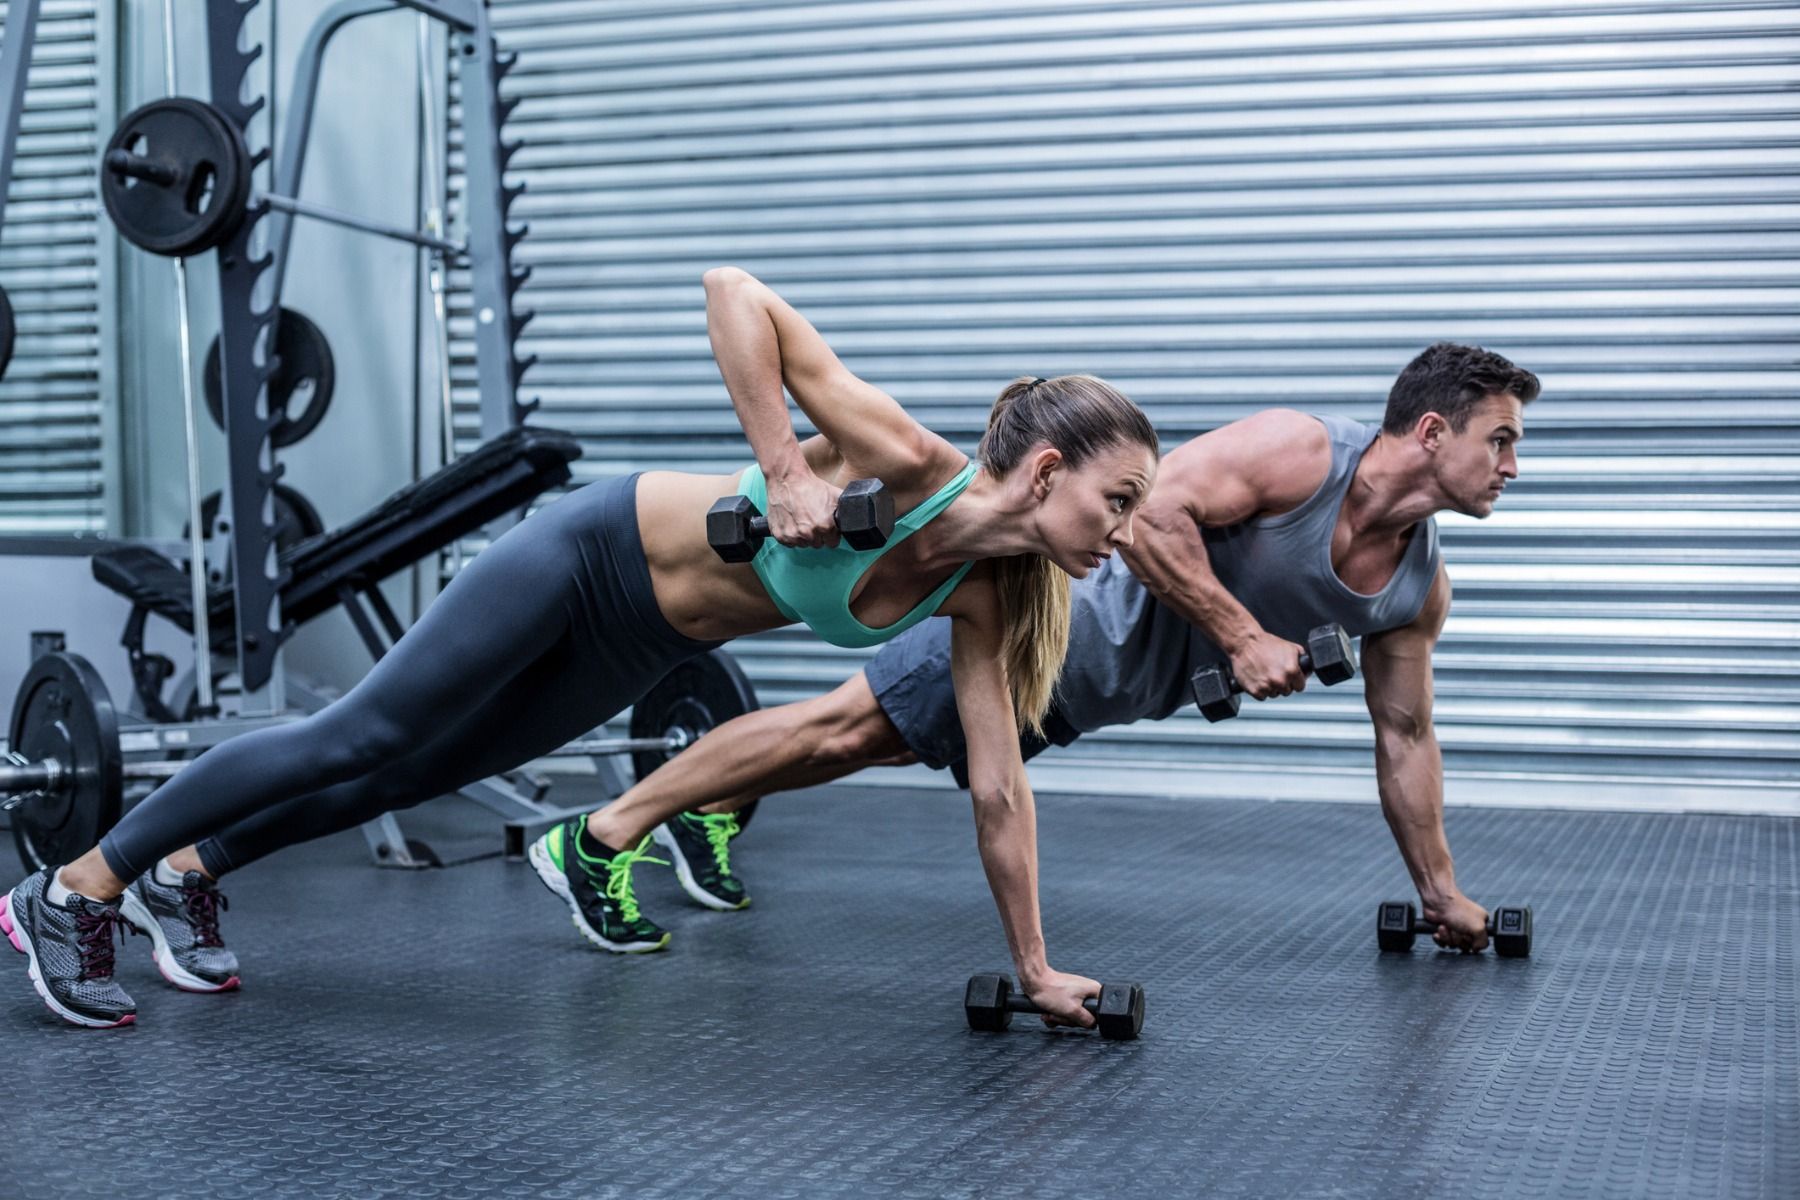 What should you start with: cardio or strength training?